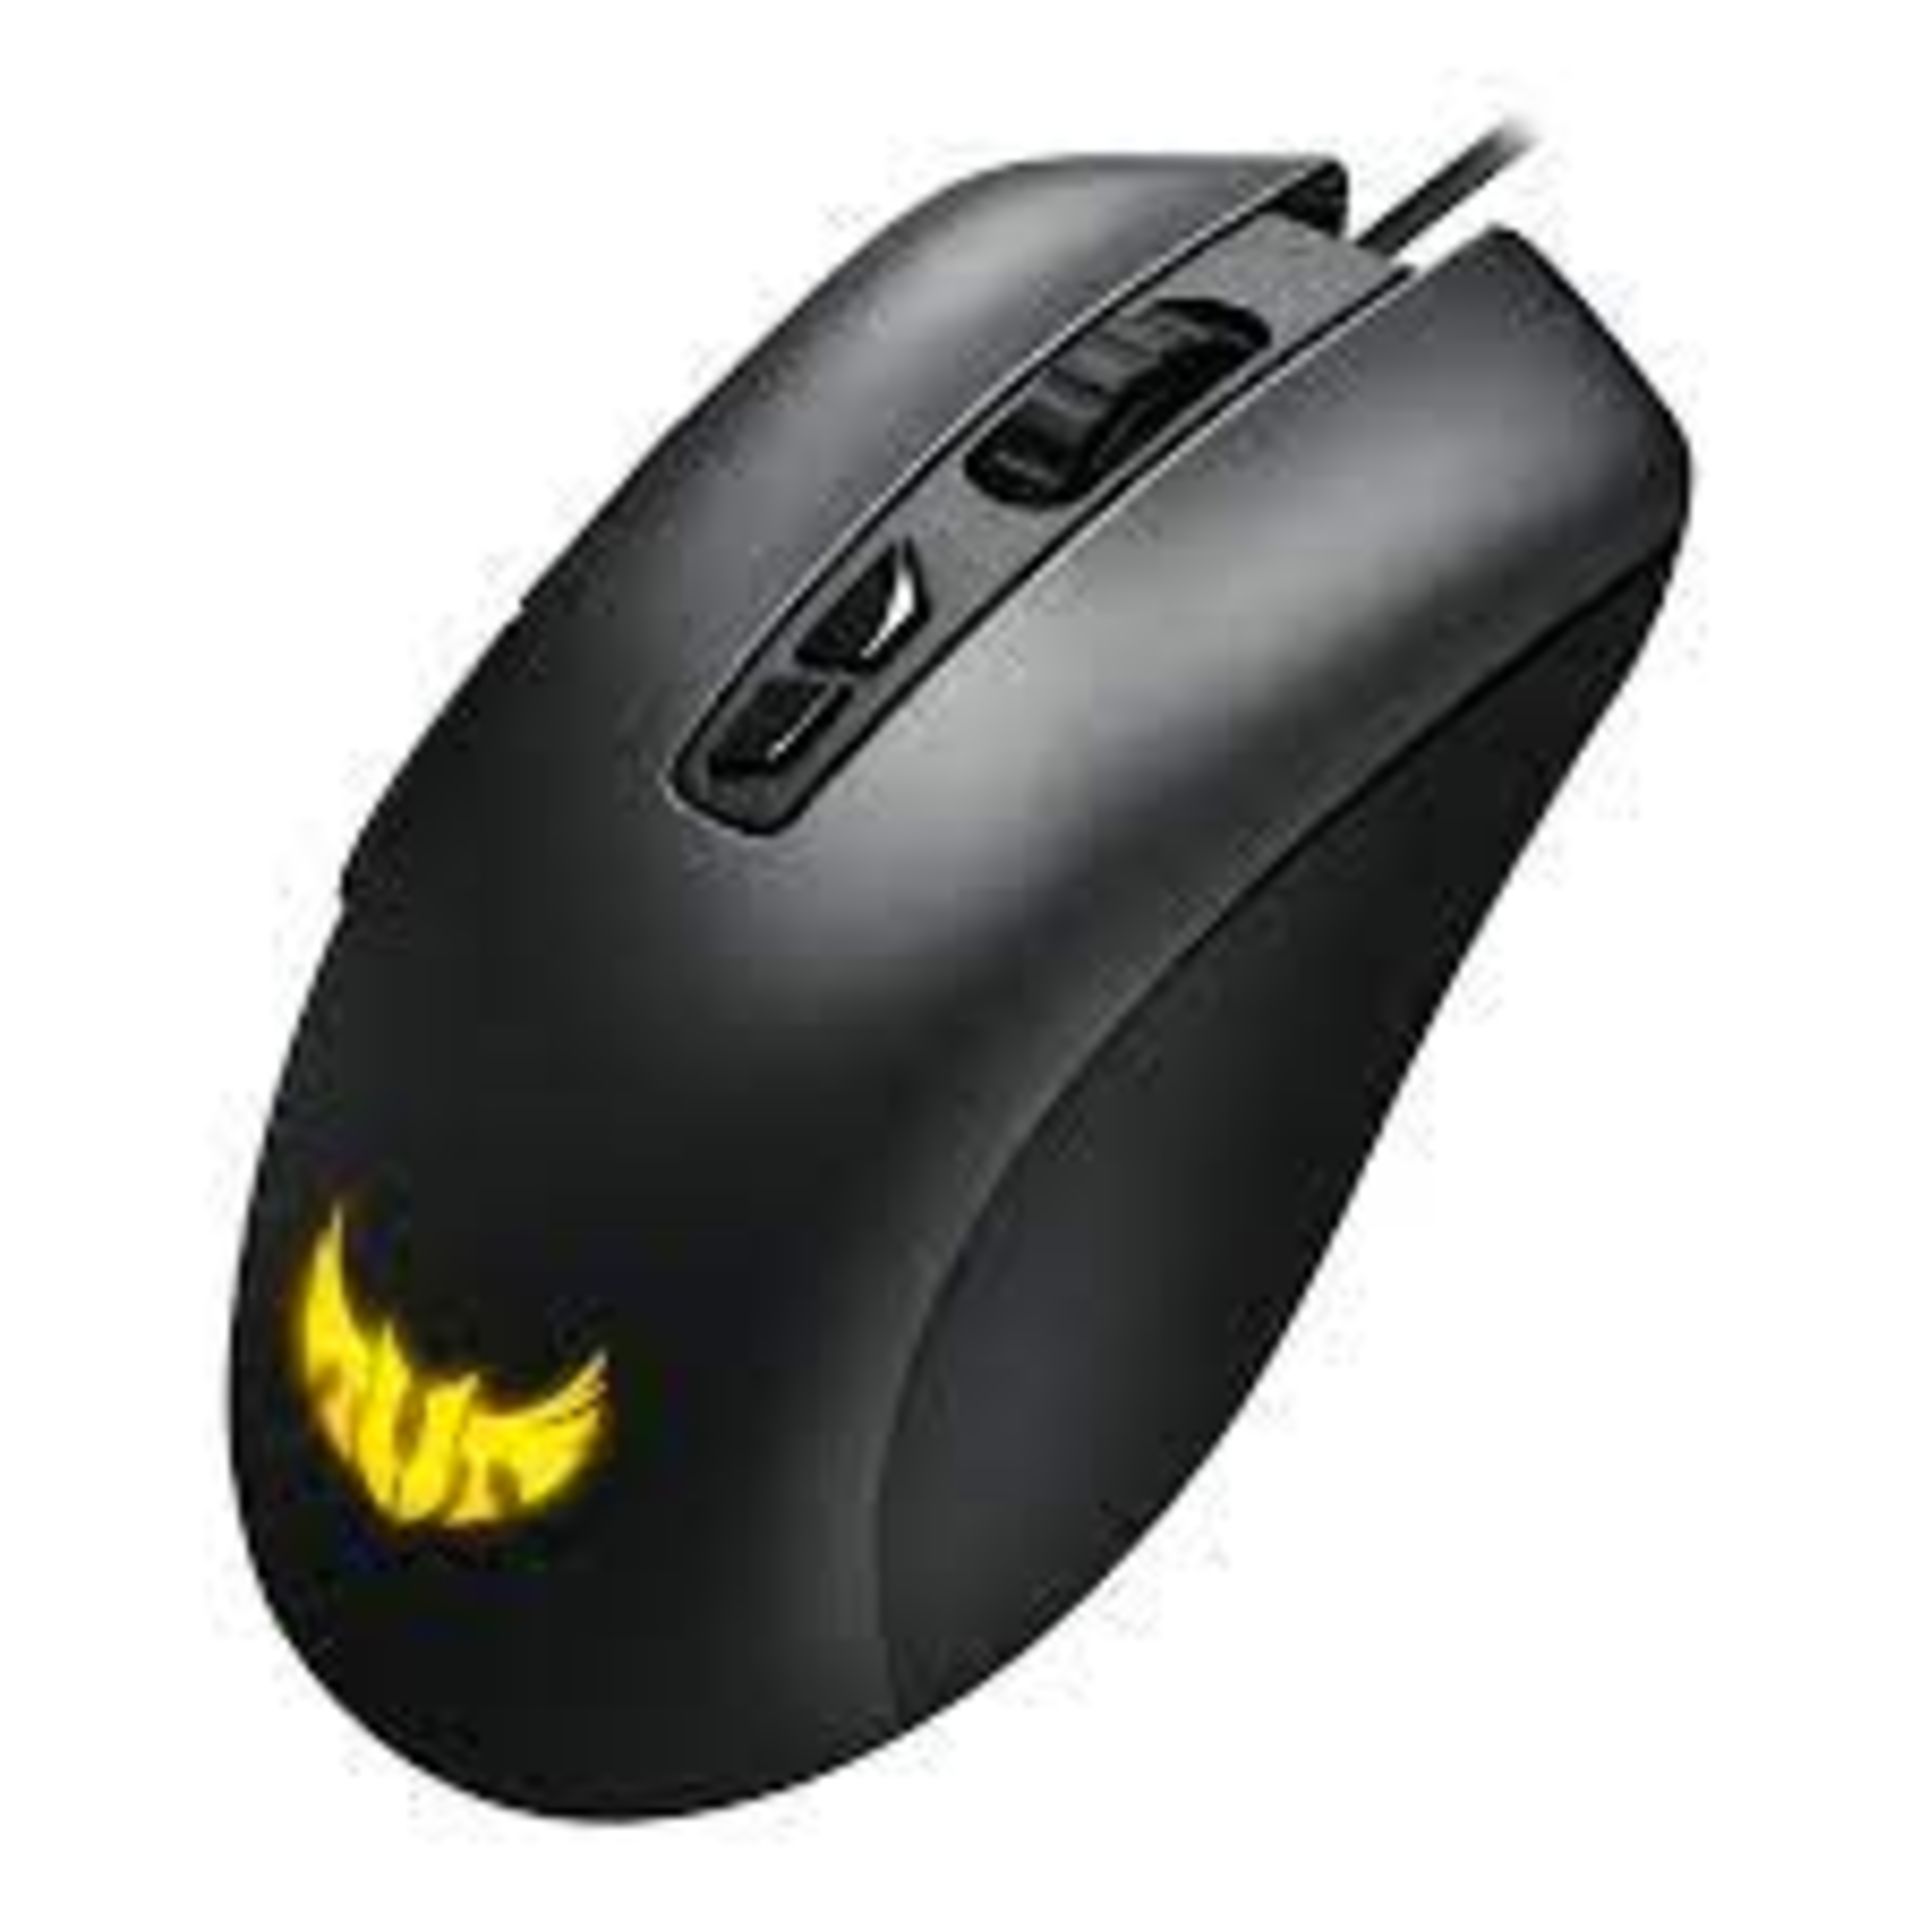 1 x Asus TUF Gaming M3 Mouse - 7000 dpi Optical Sensor - Seven Programmable Buttons With Onboard - Image 2 of 3